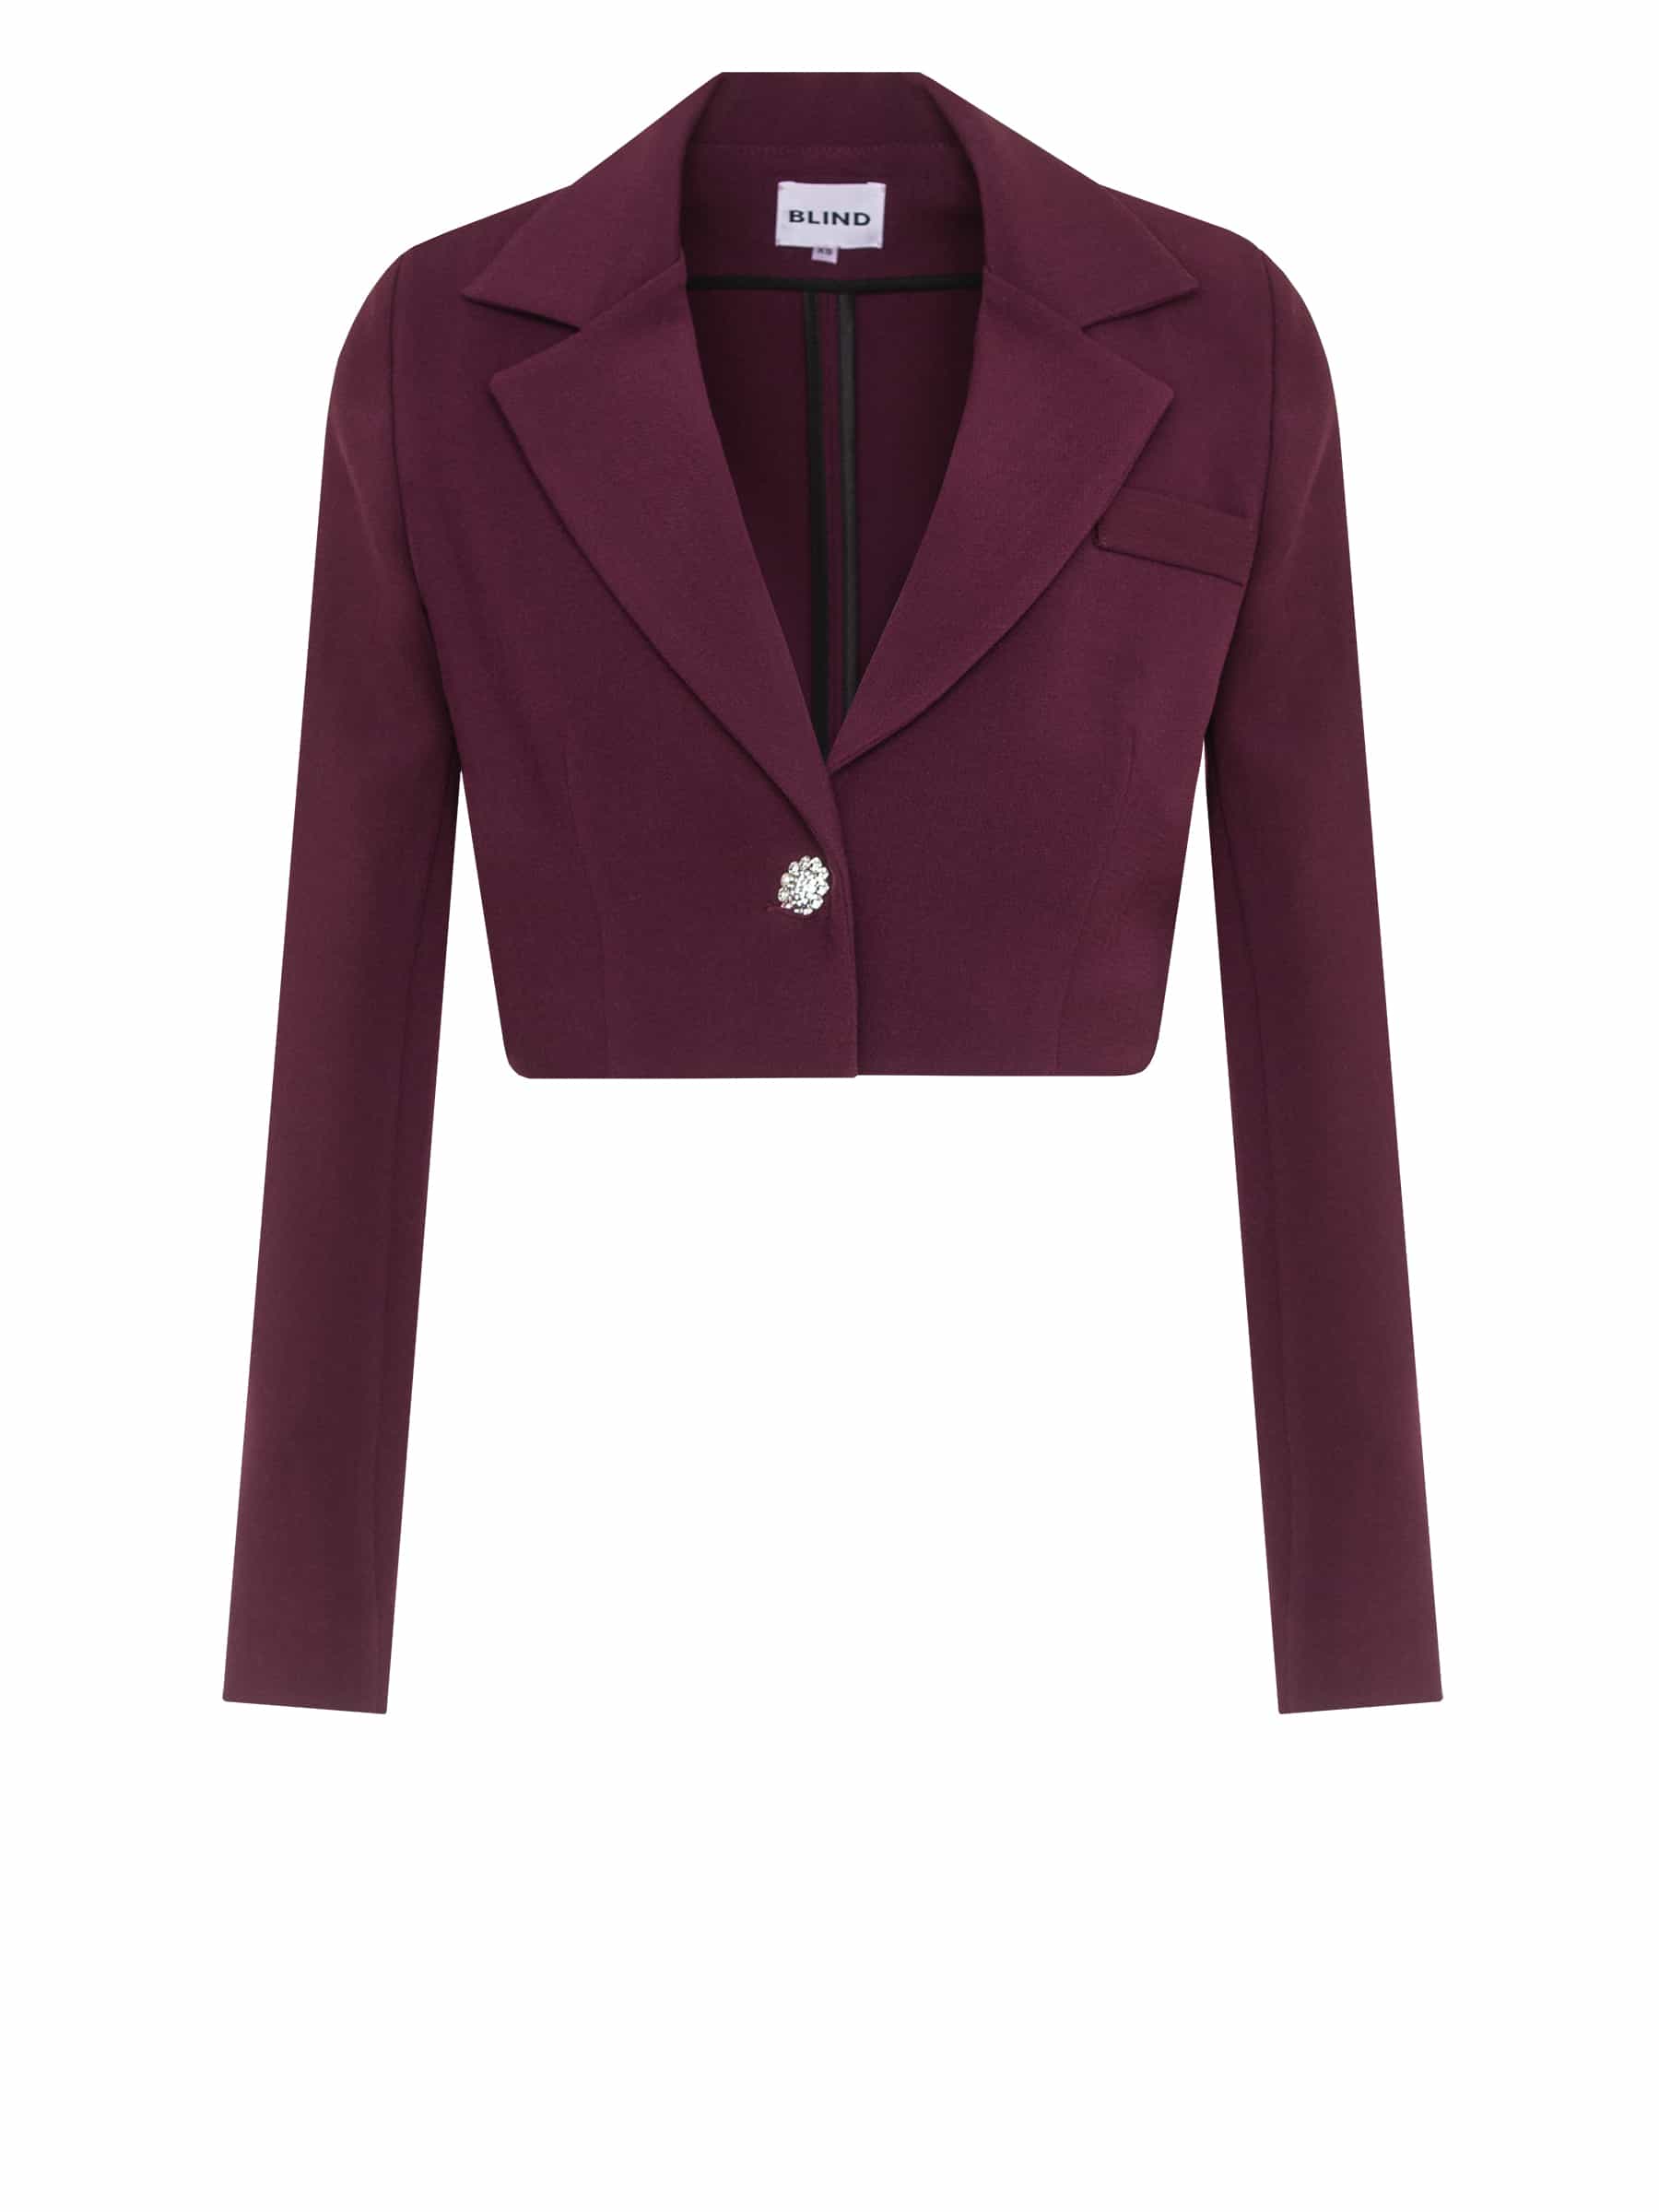 Two-piece burgundy suit (skirt, jacket)